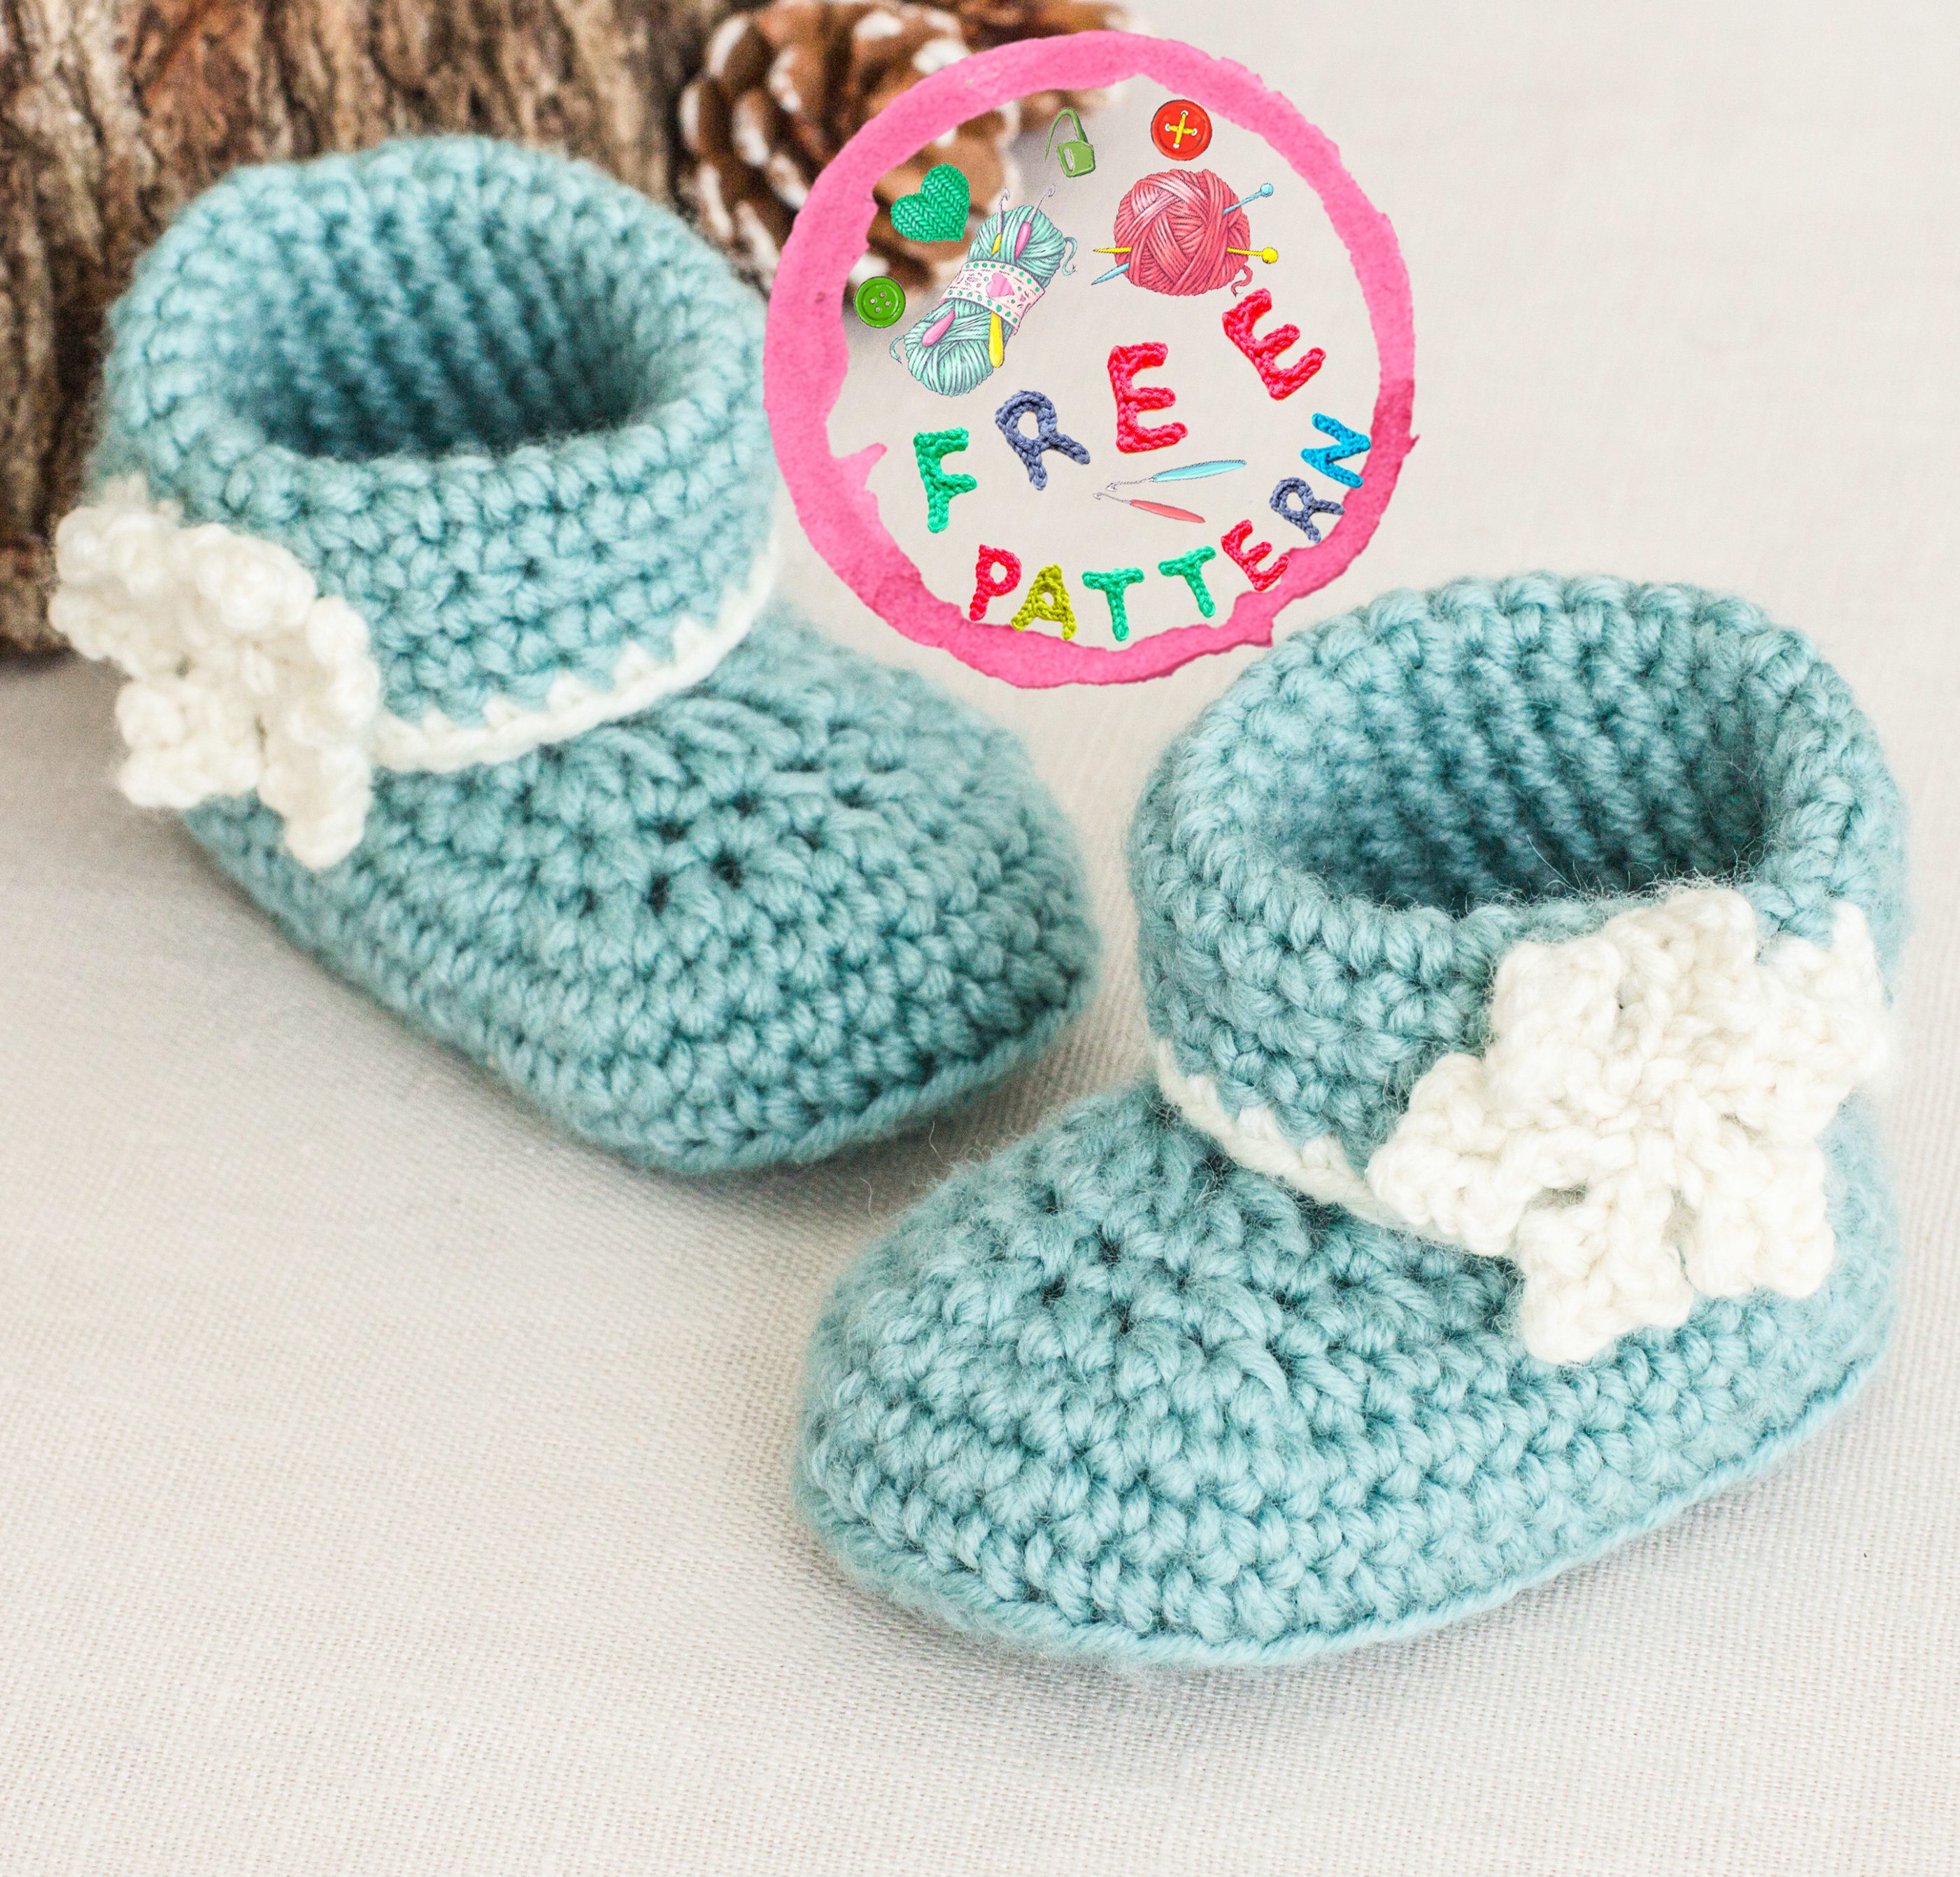 Free Printable Crochet Baby Booties Patterns - Printable Templates